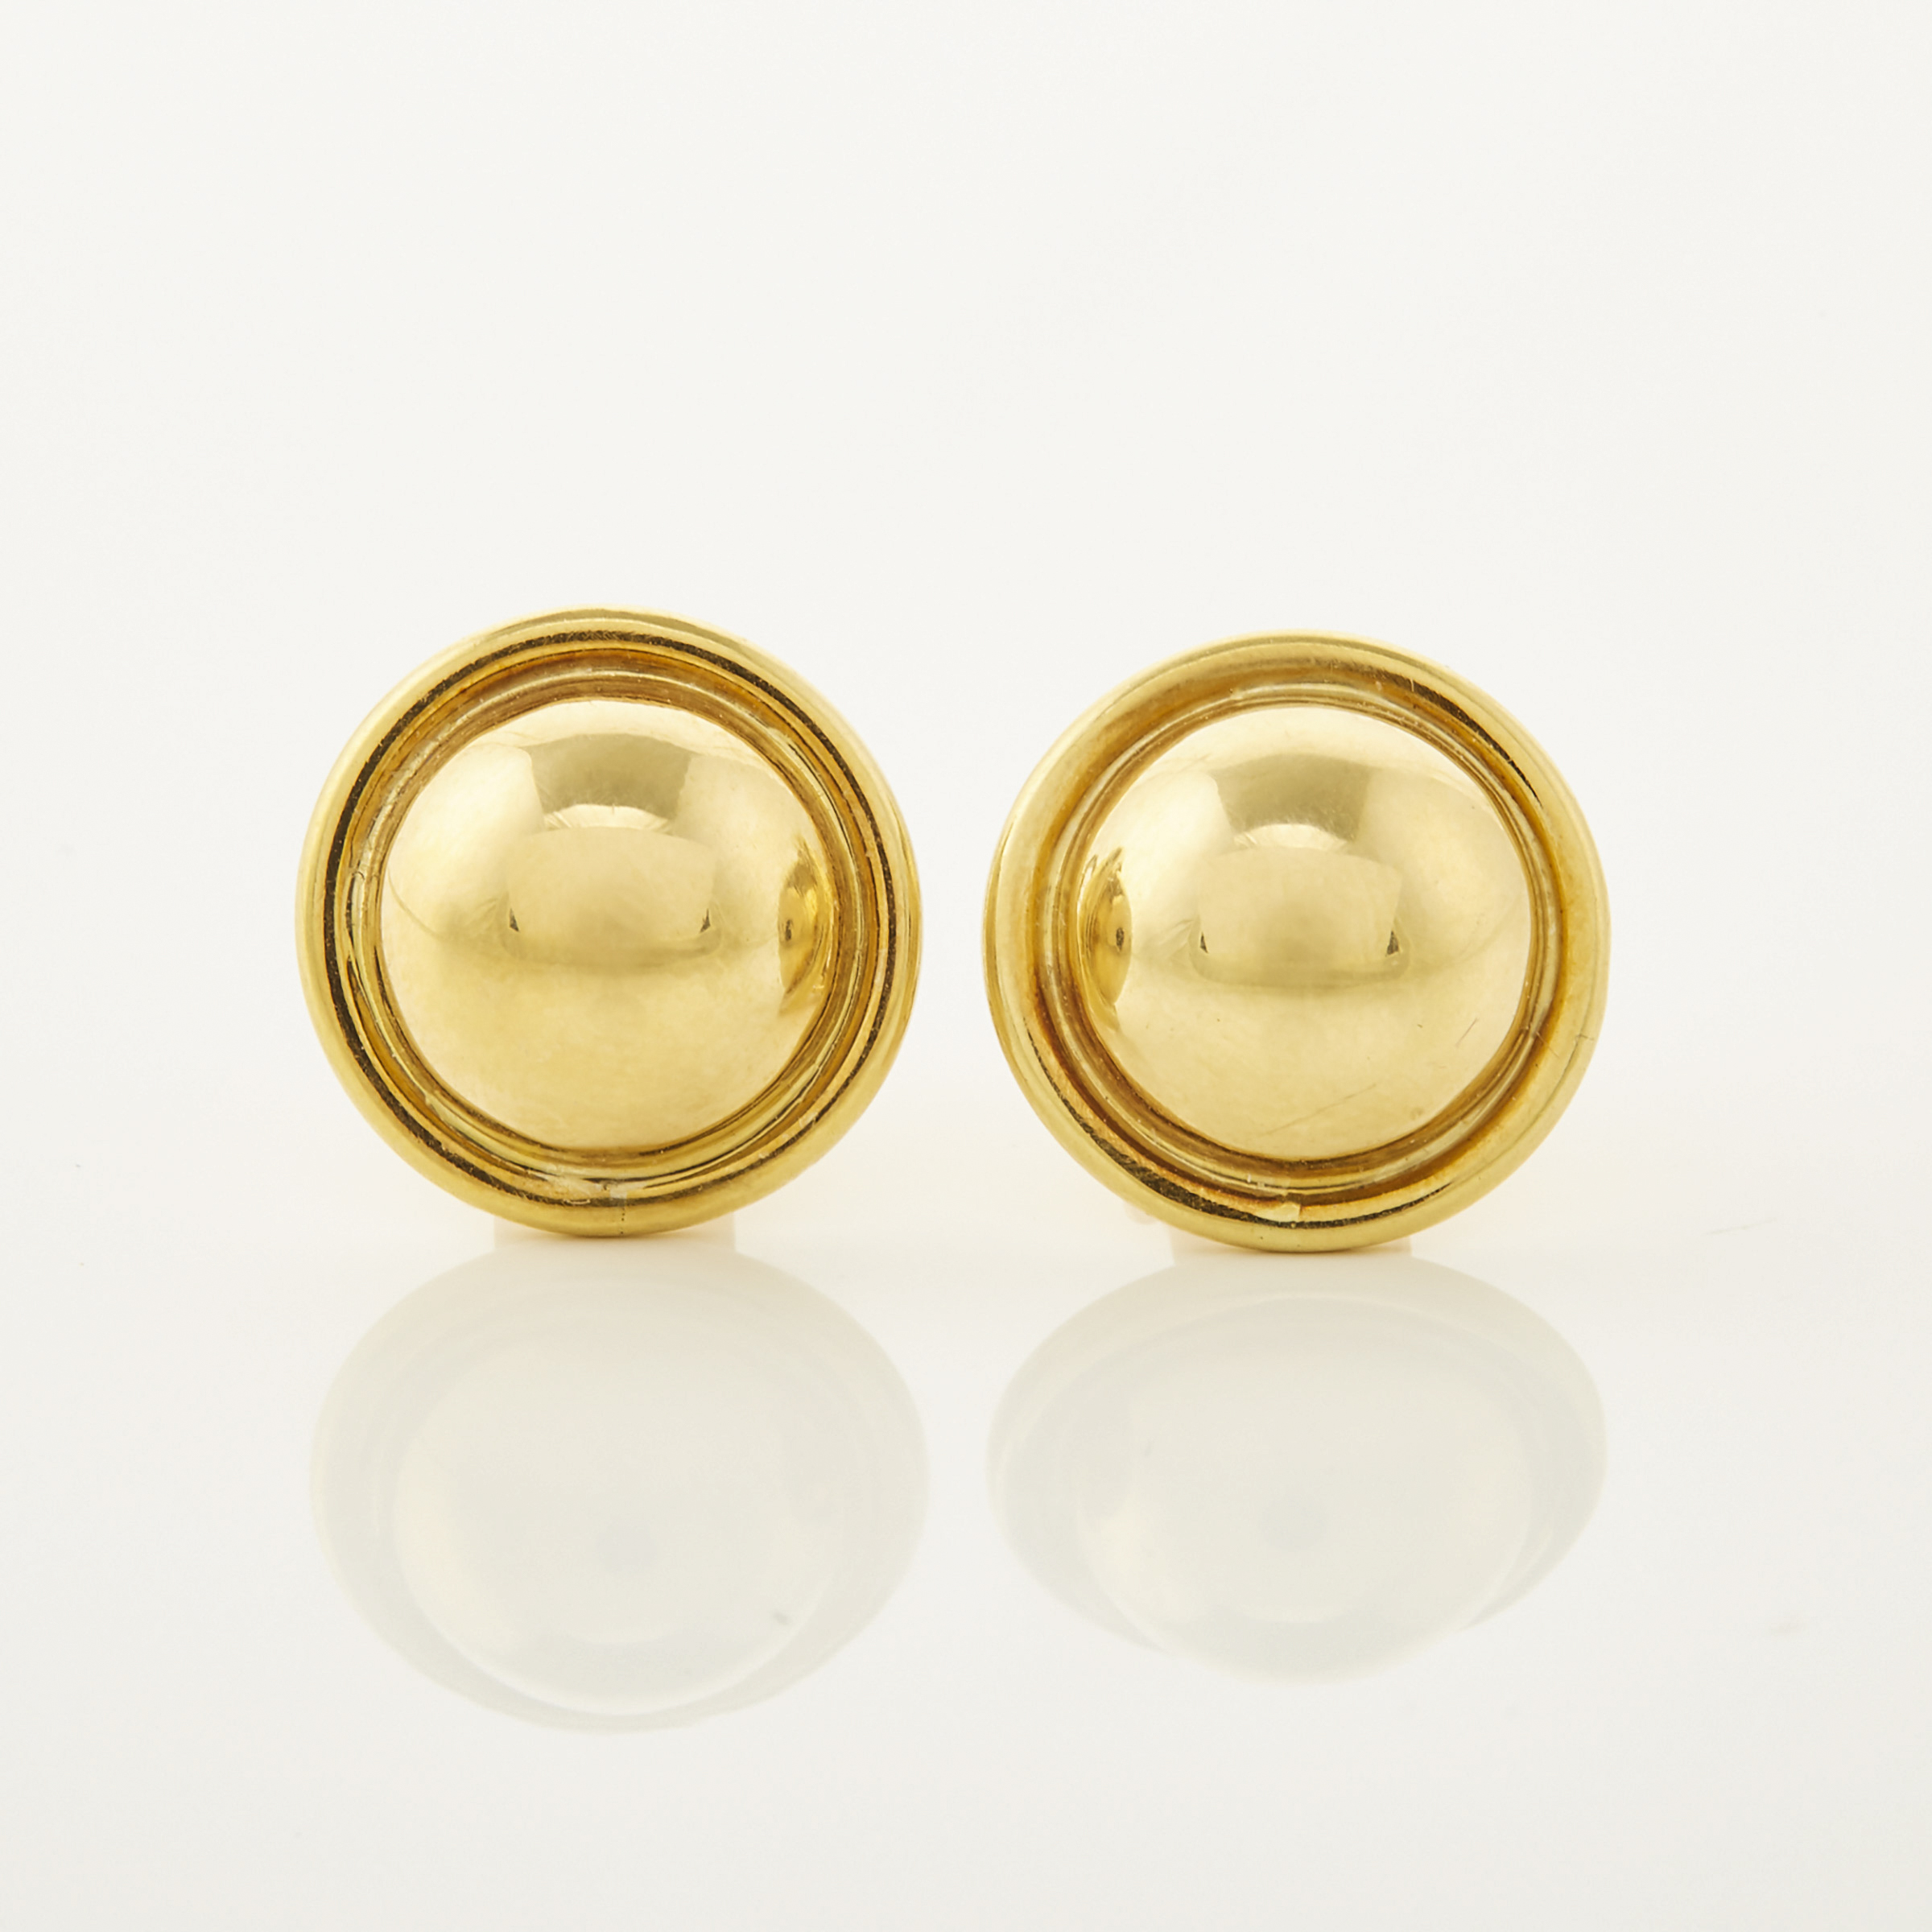 Pair of 18k Yellow Gold Domed Button Earrings